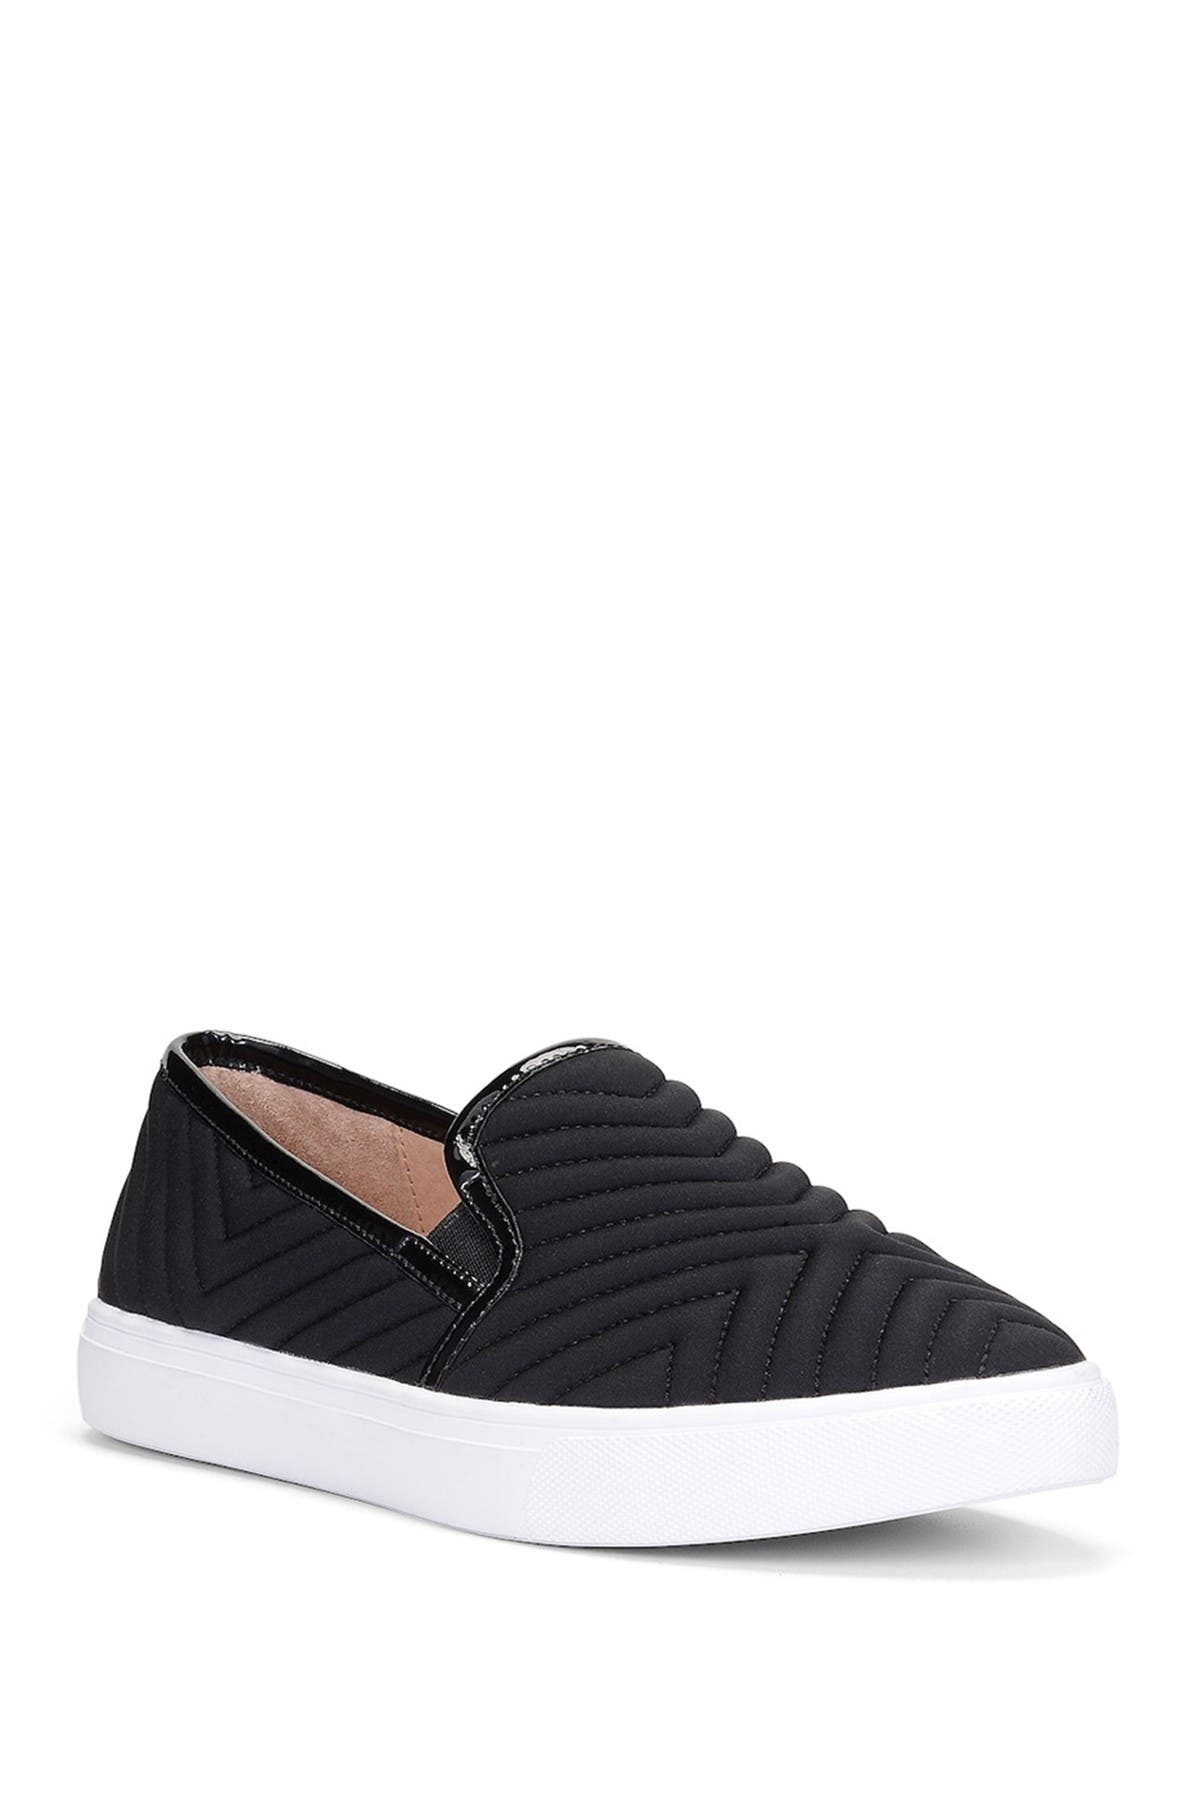 Donald Pliner | Pammy Quilted Slip-On 